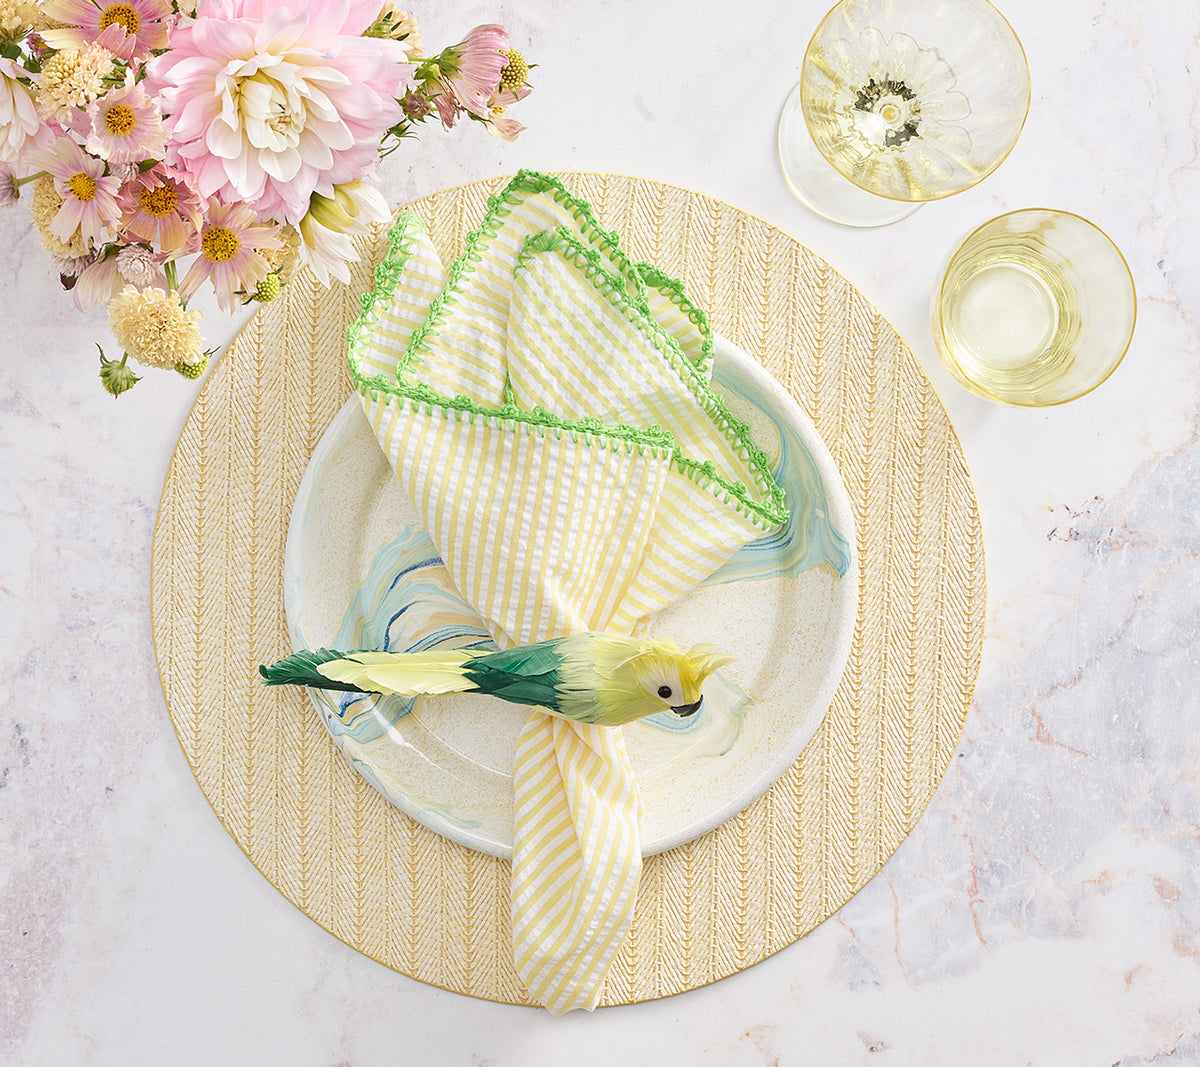 Herringbone Placemat in Butter, Set of 4